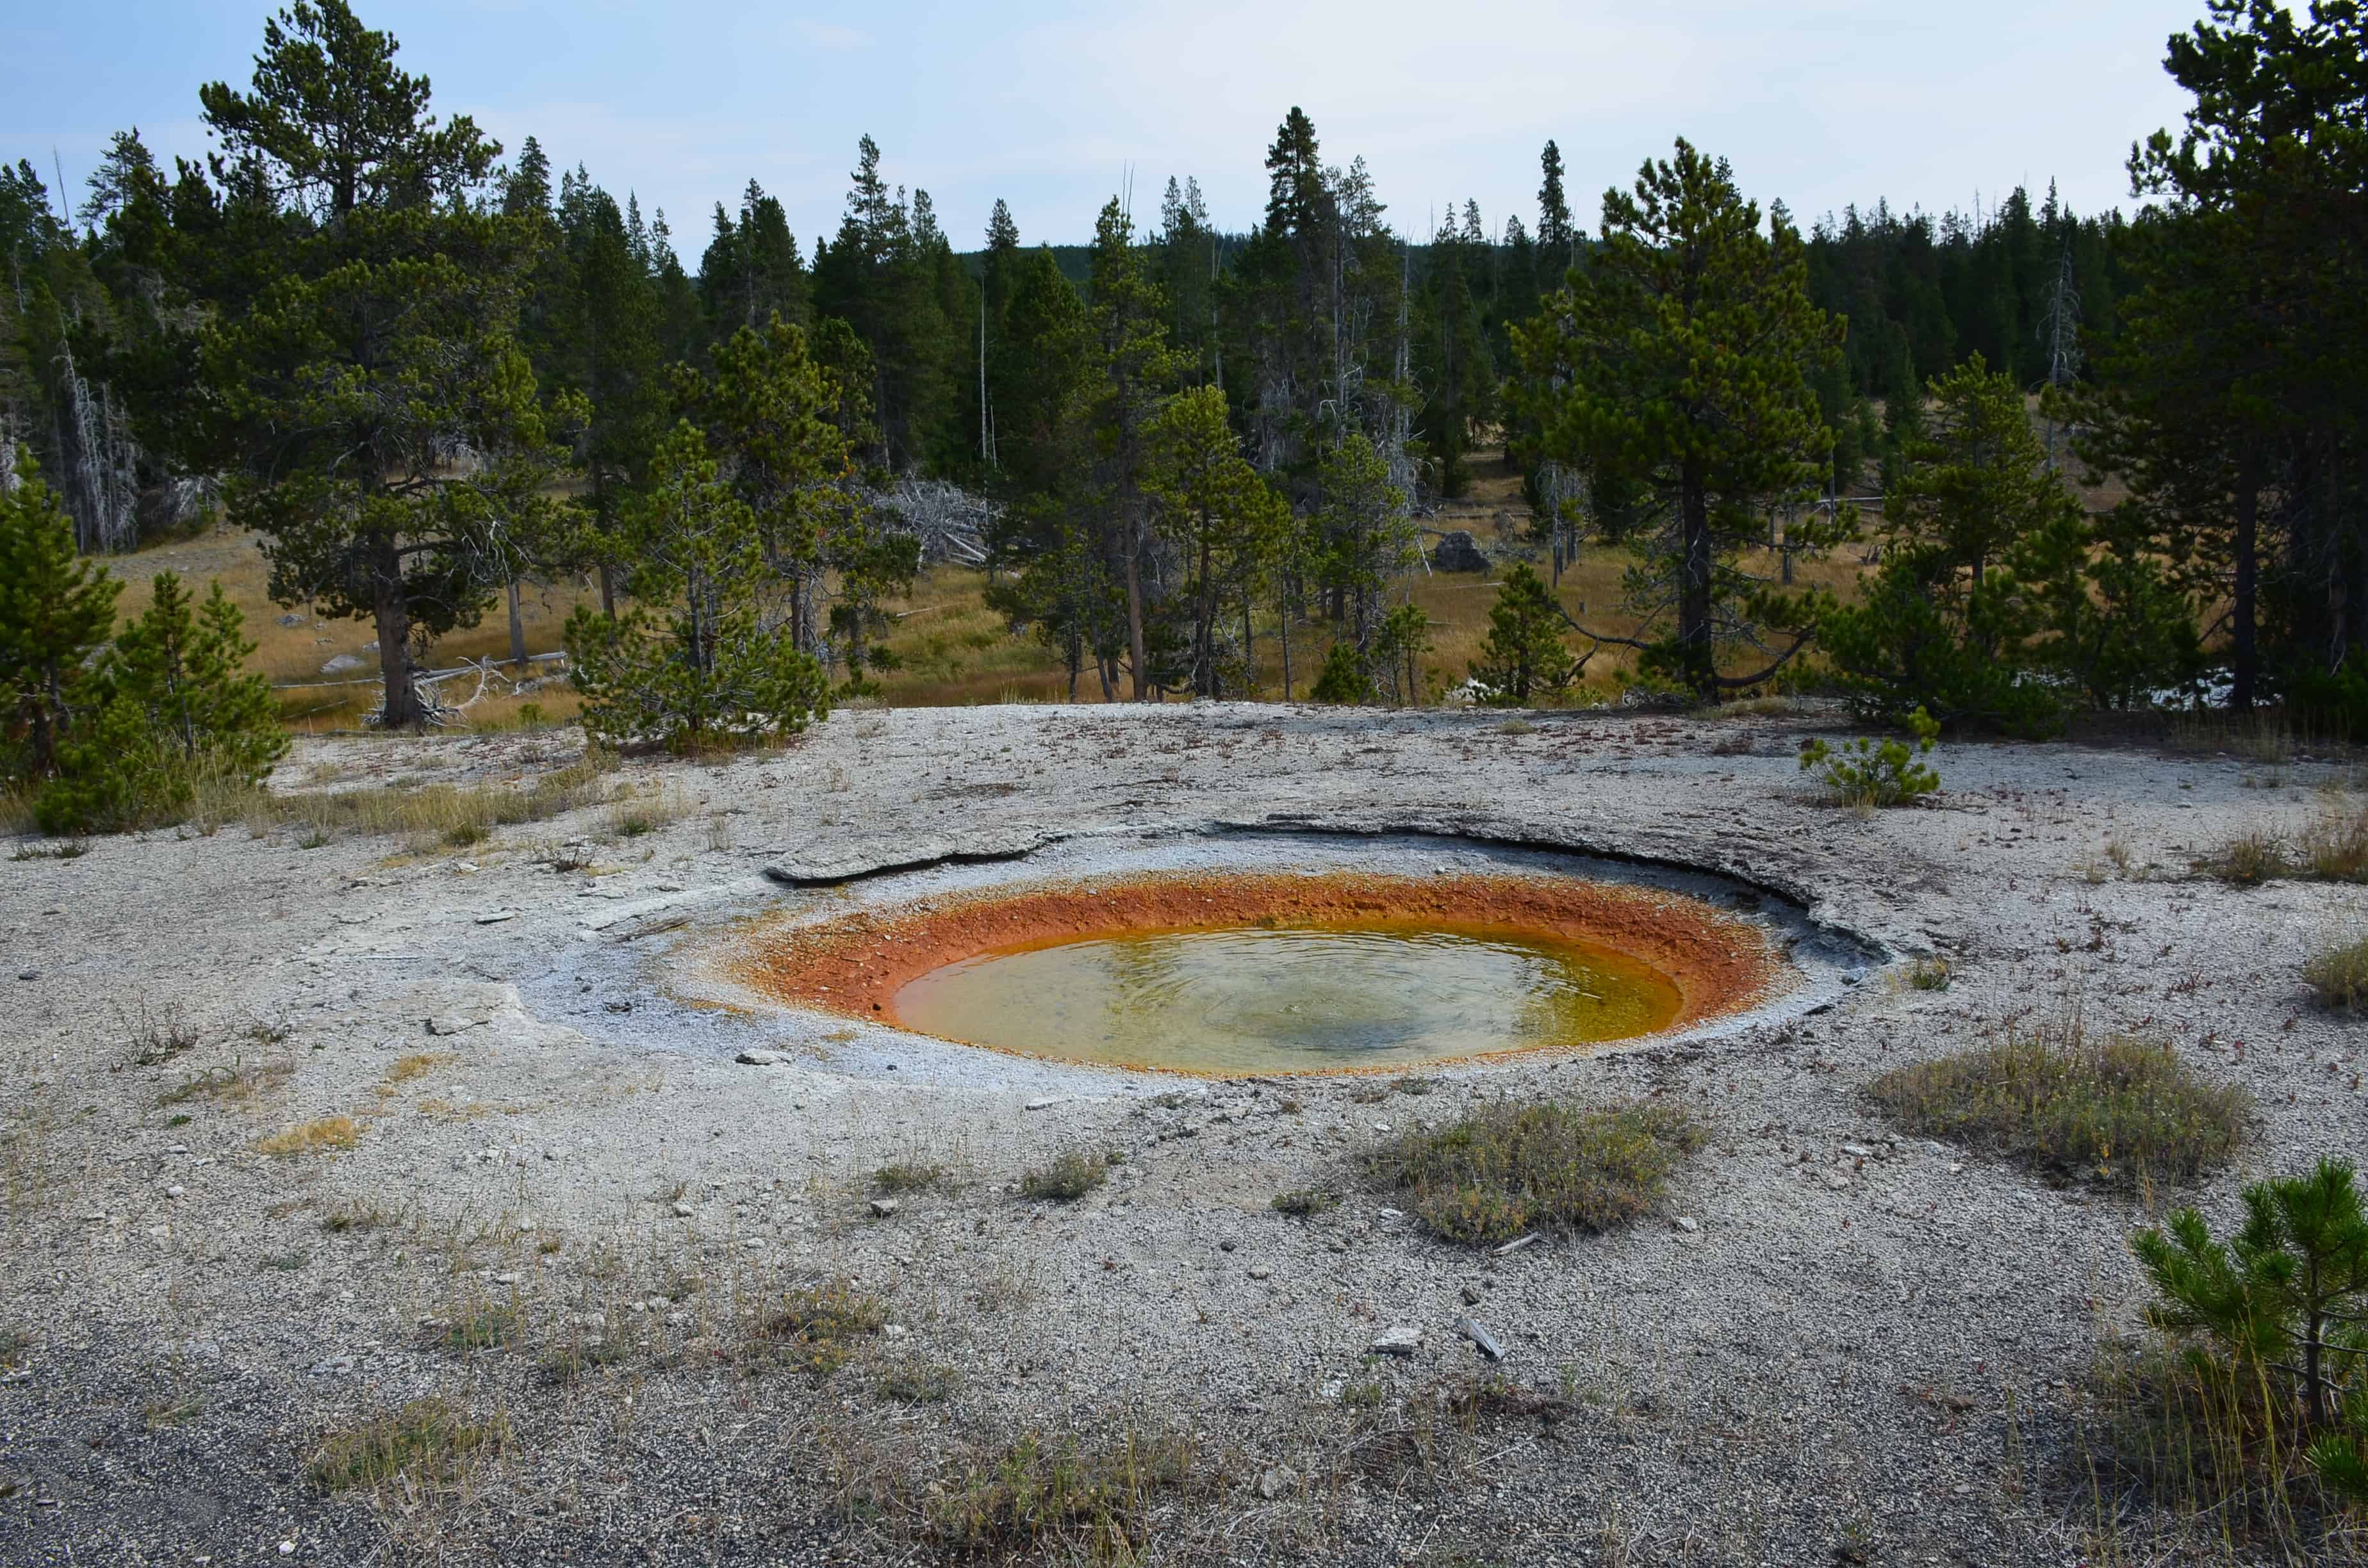 Marathon Pool at the Upper Geyser Basin in Yellowstone National Park, Wyoming